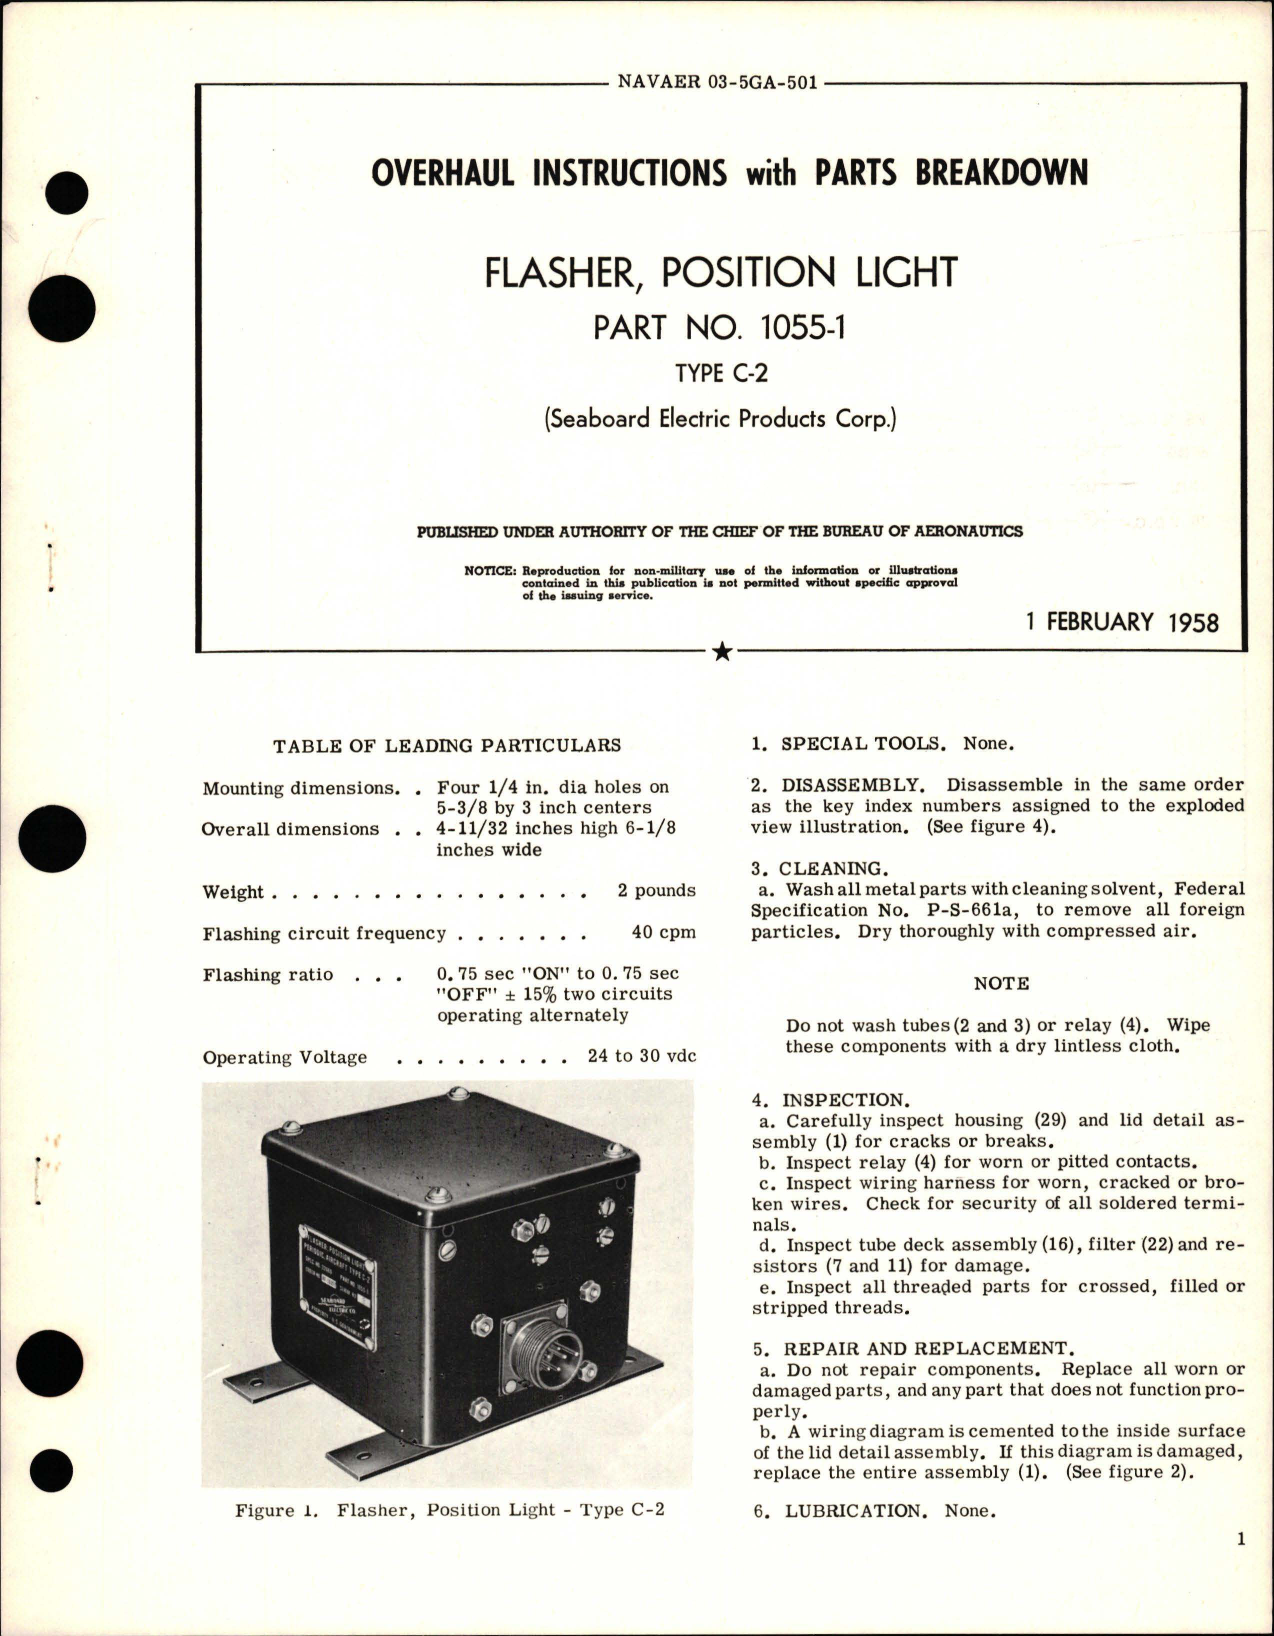 Sample page 1 from AirCorps Library document: Overhaul Instructions with Parts Breakdown for Position Light Flasher - Type C-2, Part 1055-1